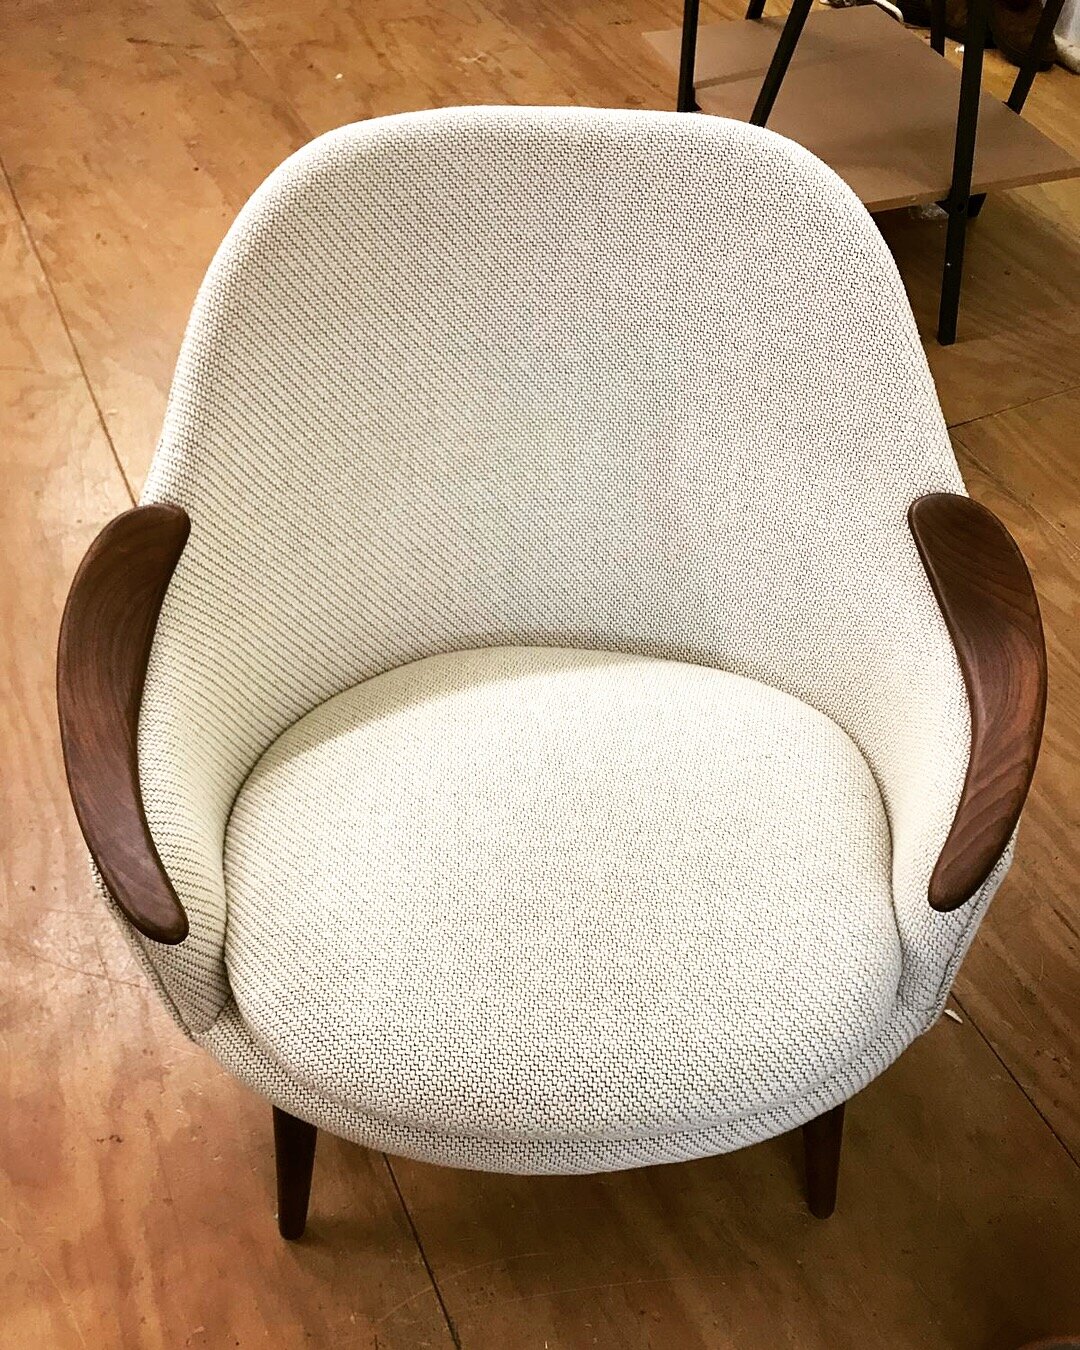 Curved mid-century chair